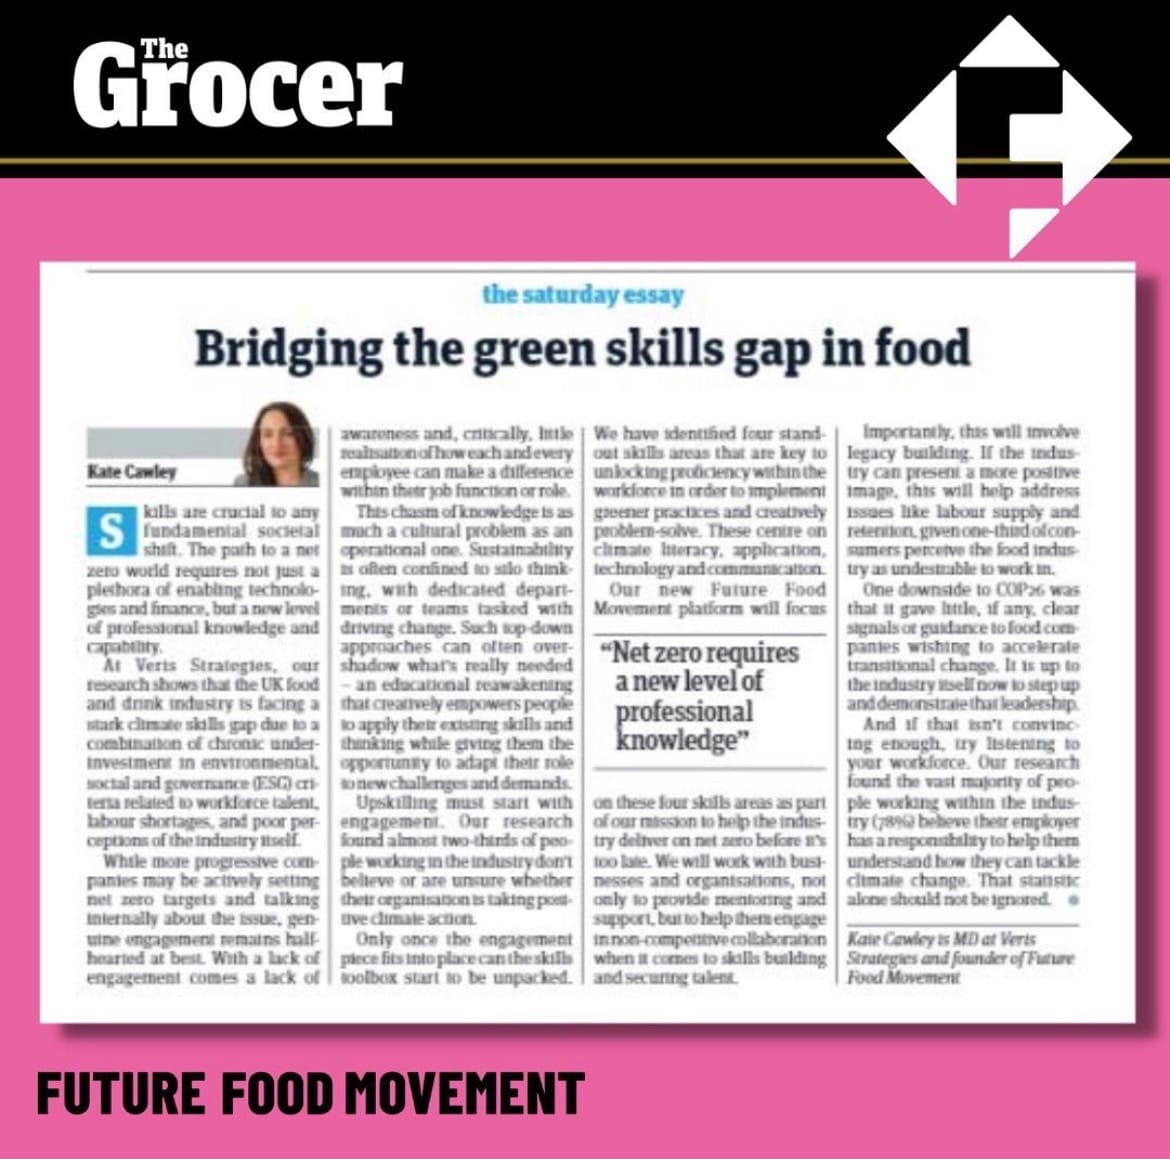 Kate Cawley, The Grocer, Future Food Movement